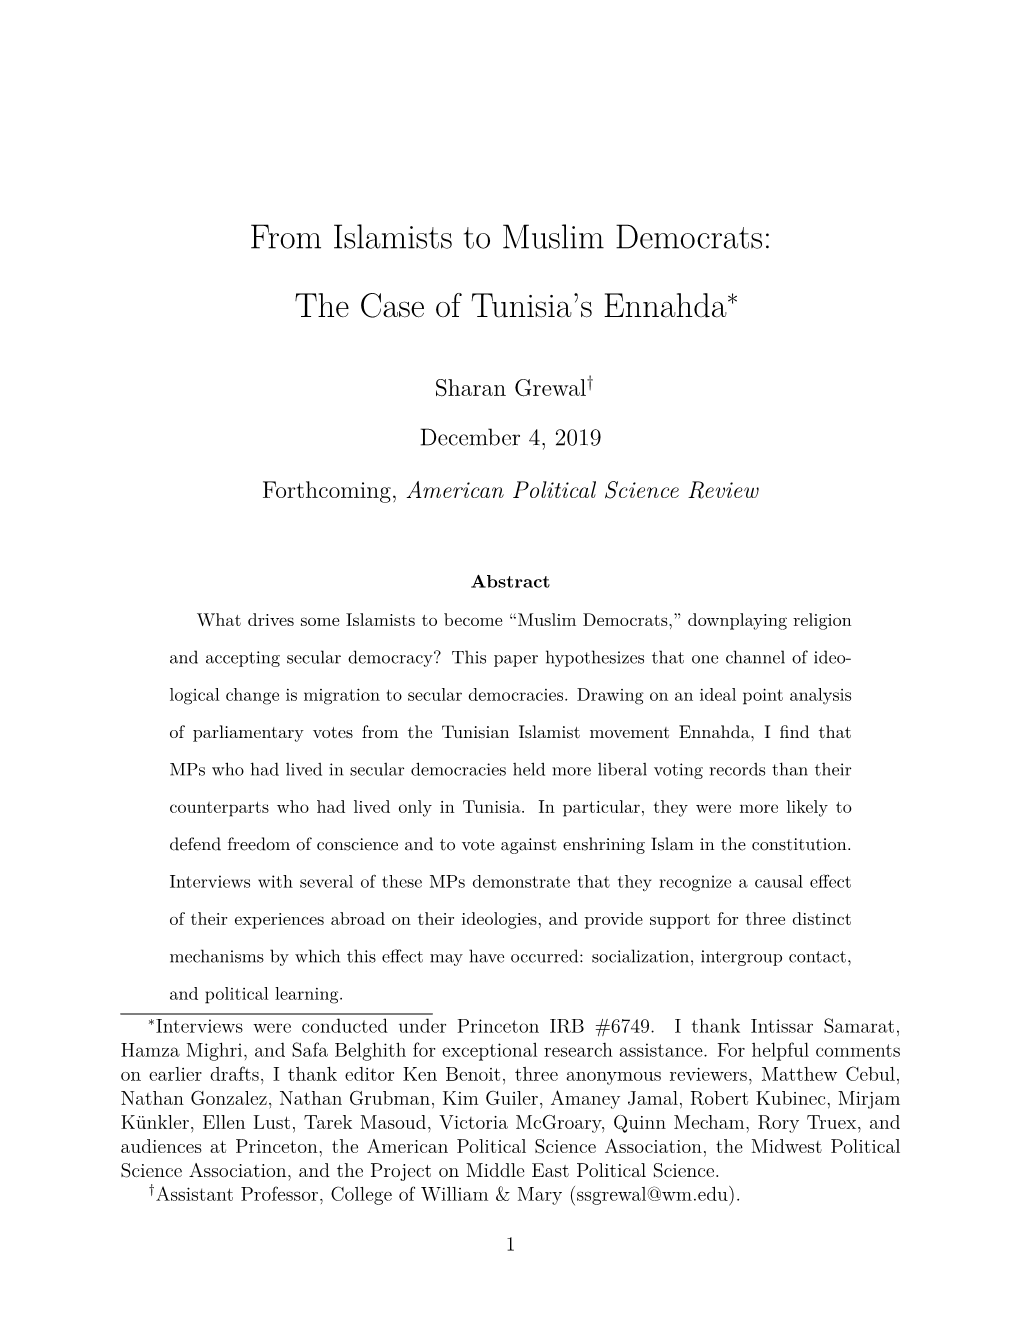 From Islamists to Muslim Democrats: the Case of Tunisia's Ennahda